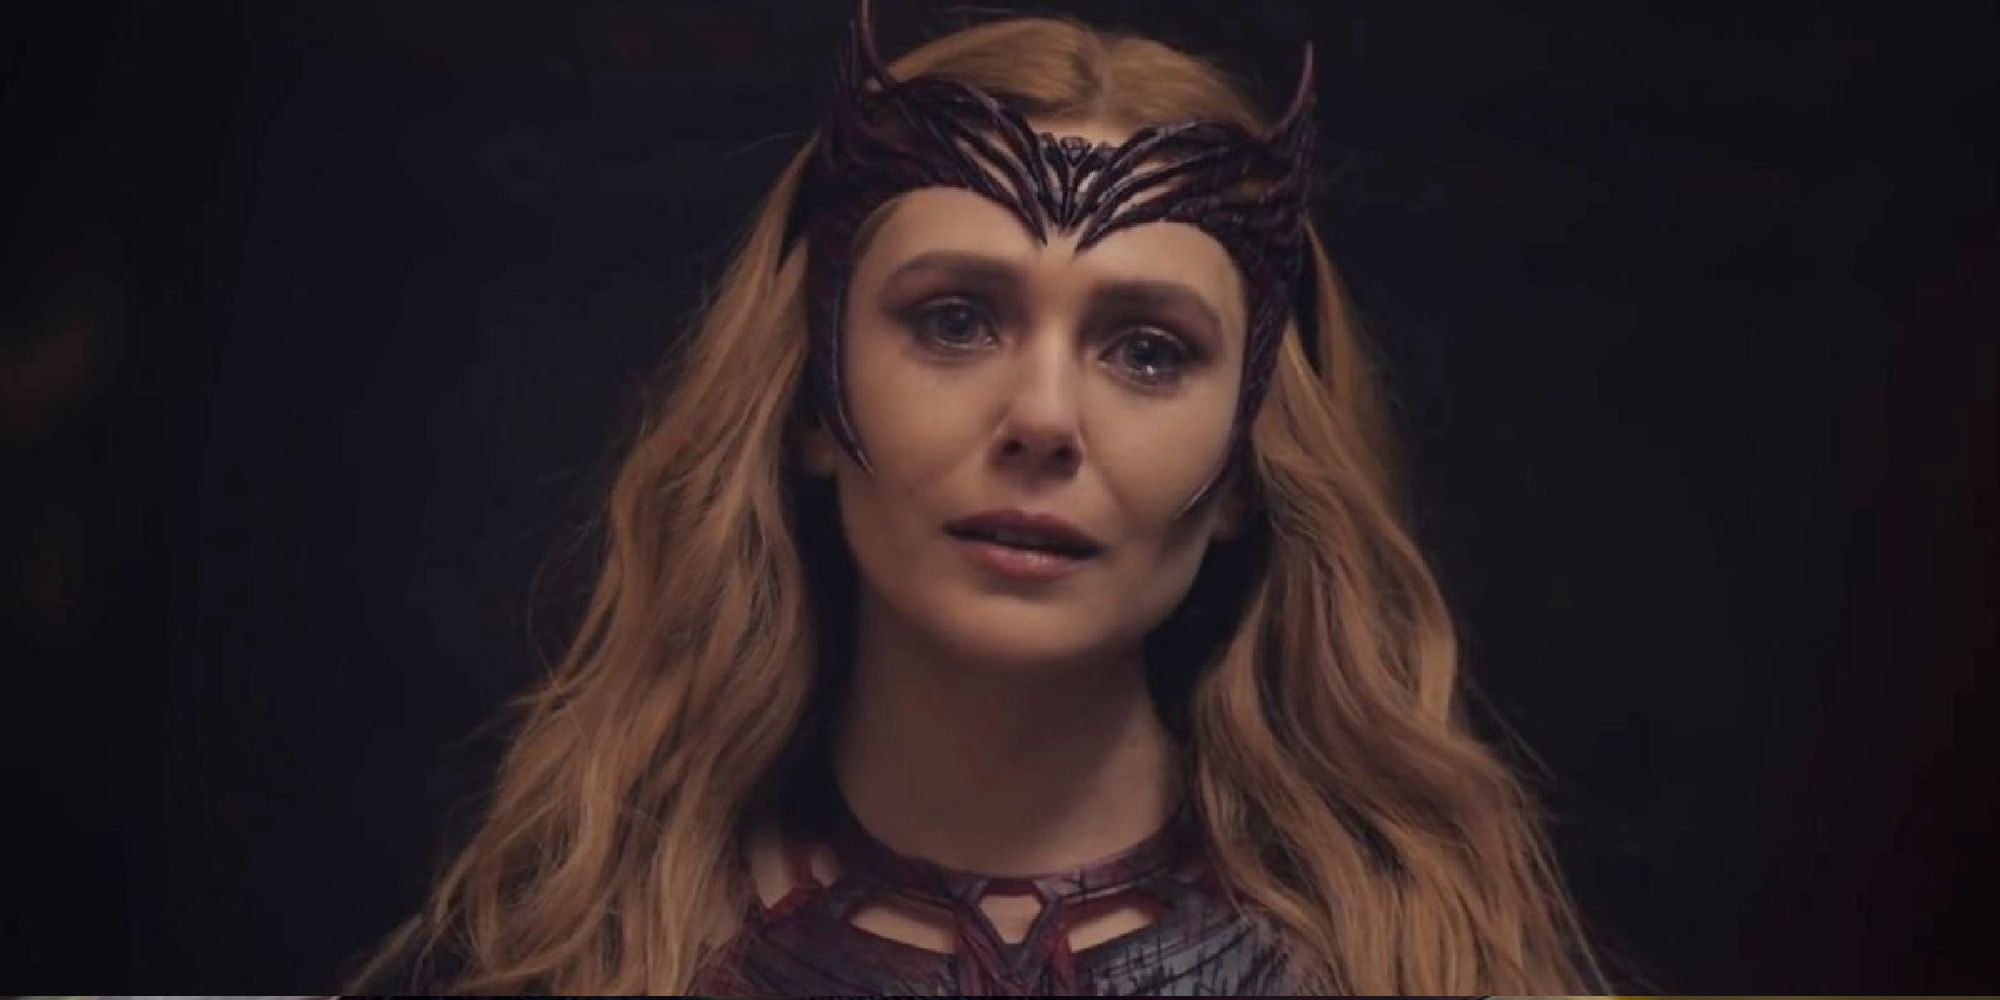 Wanda Maximoff appearing as the Scarlet Witch in Doctor Strange in the Multiverse of Madness